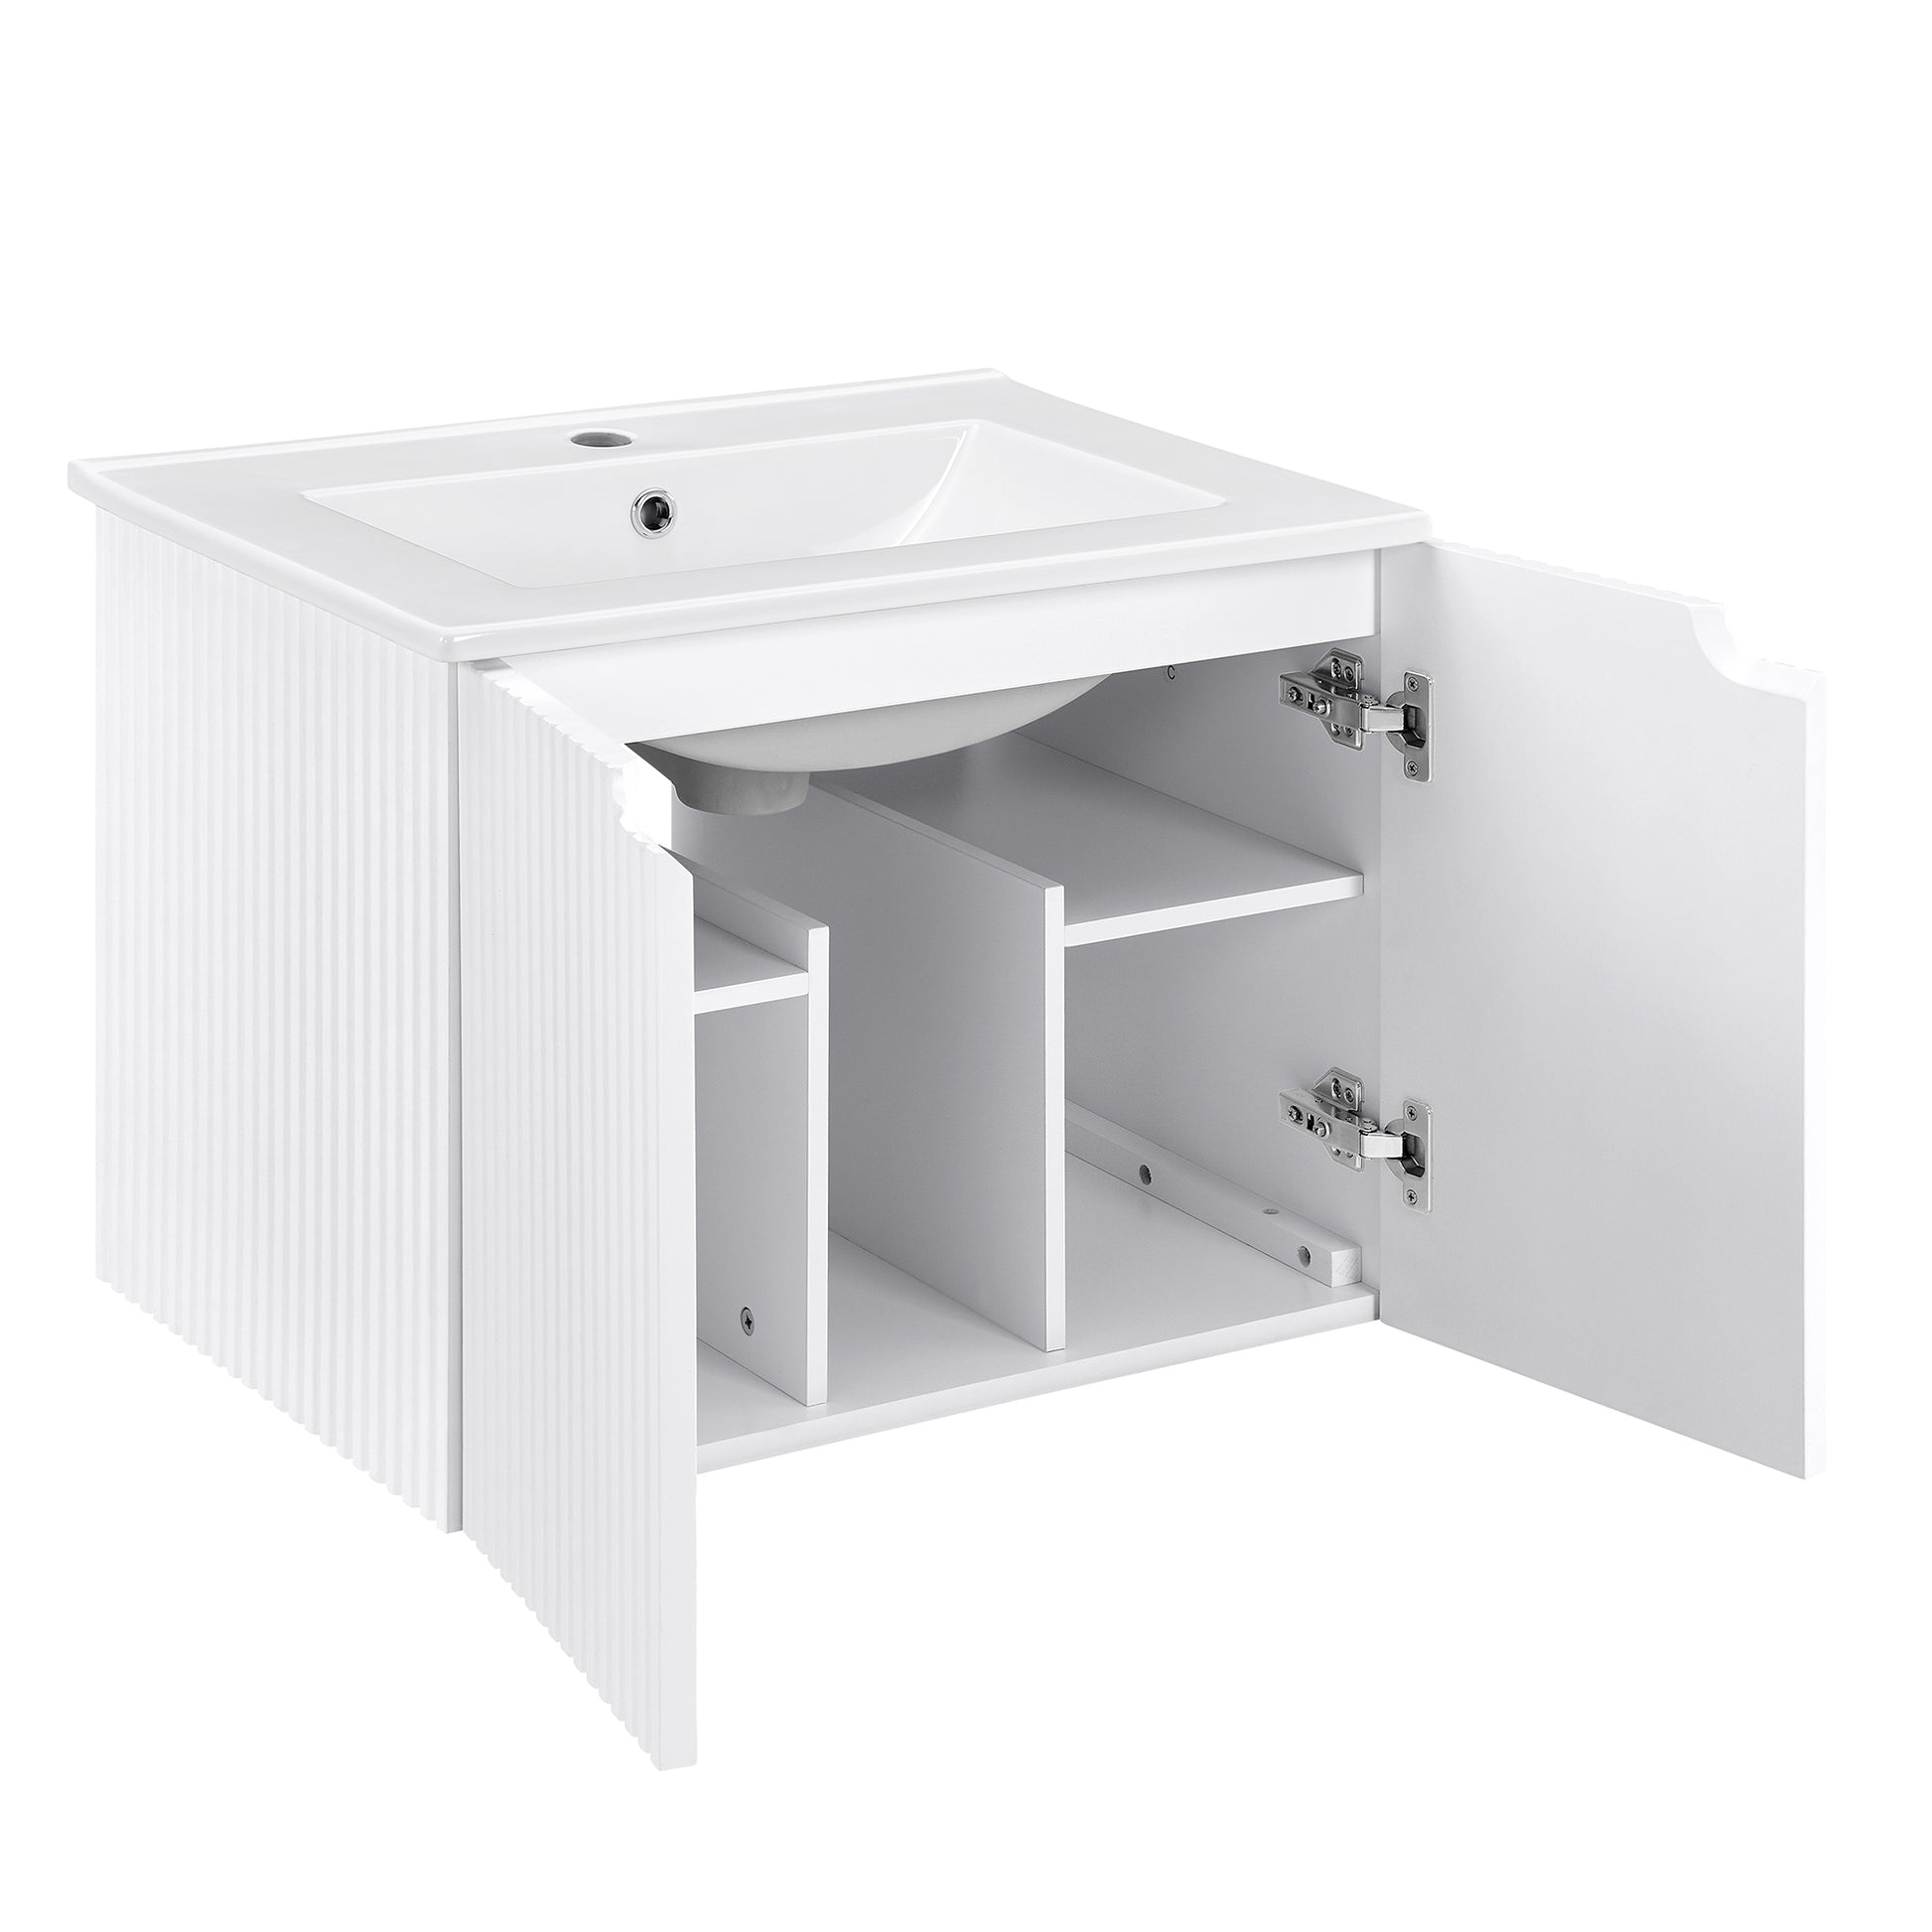 24" Floating Wall Mounted Bathroom Vanity with White white-ceramic+mdf